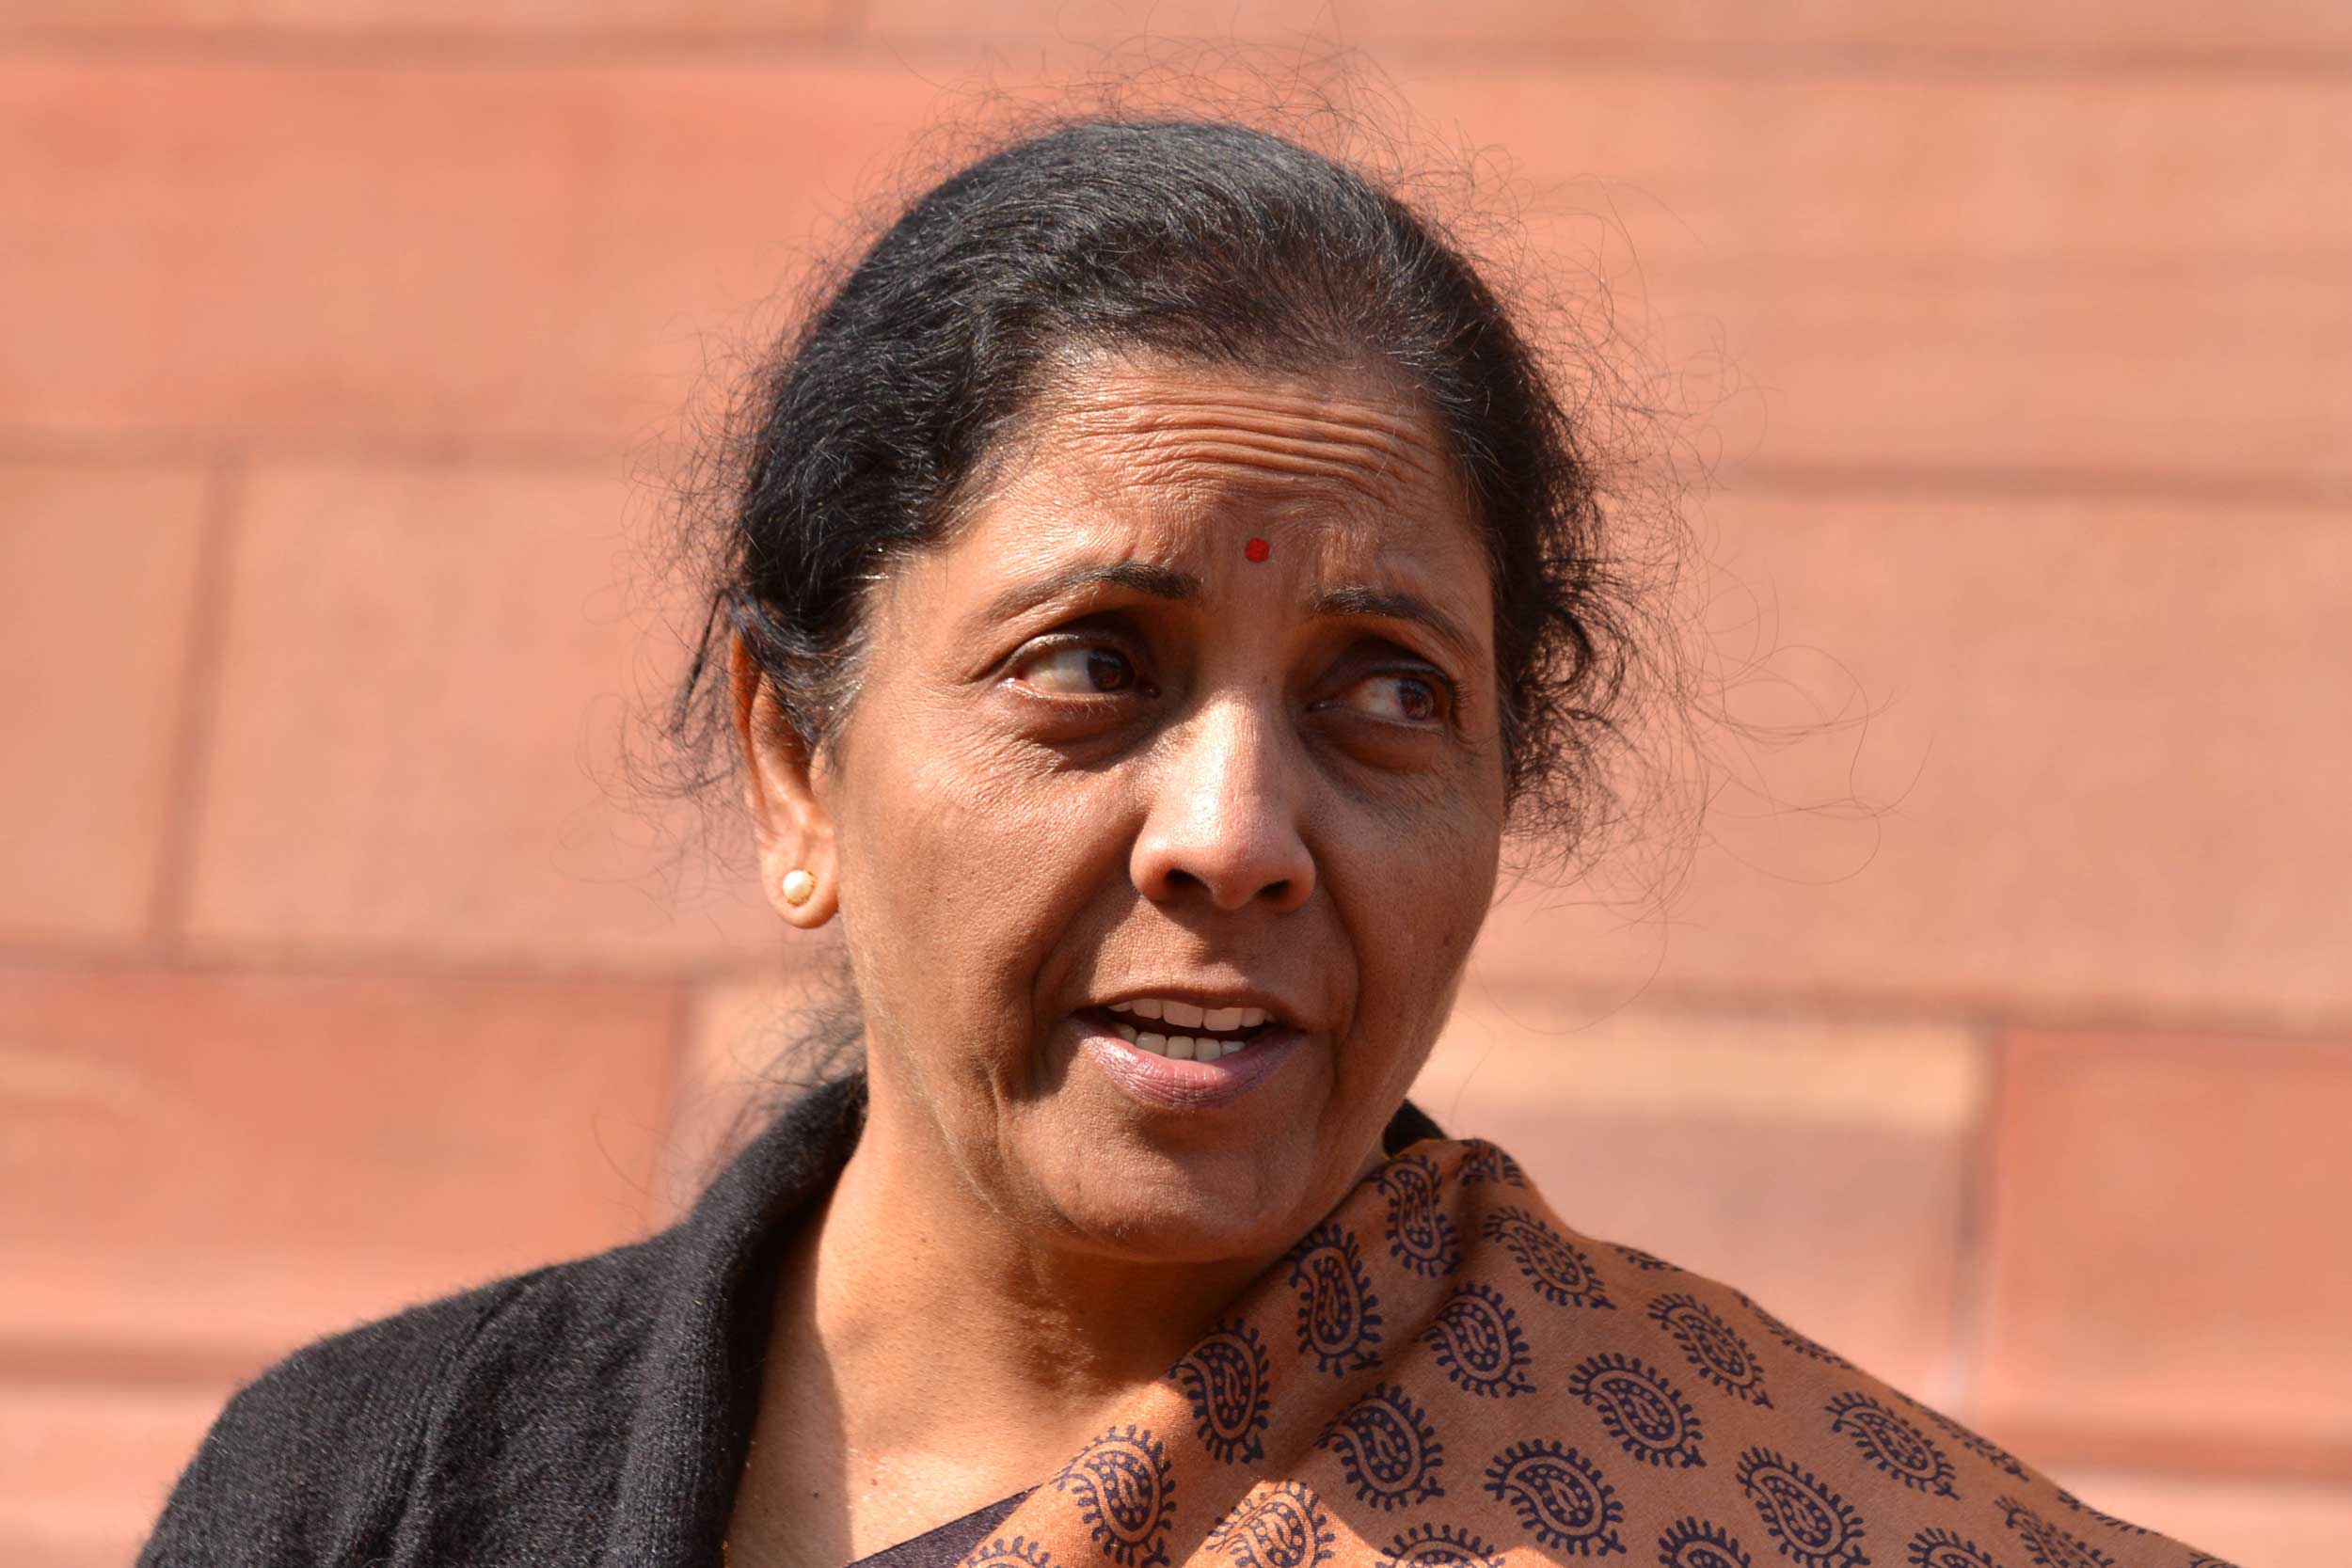 The GST Council meeting has been postponed and the new date would be decided later, officials said, adding that Nirmala Sitharaman was required to attend Parliament as the Rajya Sabha was scheduled to take up for discussion the amendments to the Insolvency and Bankruptcy Code.
